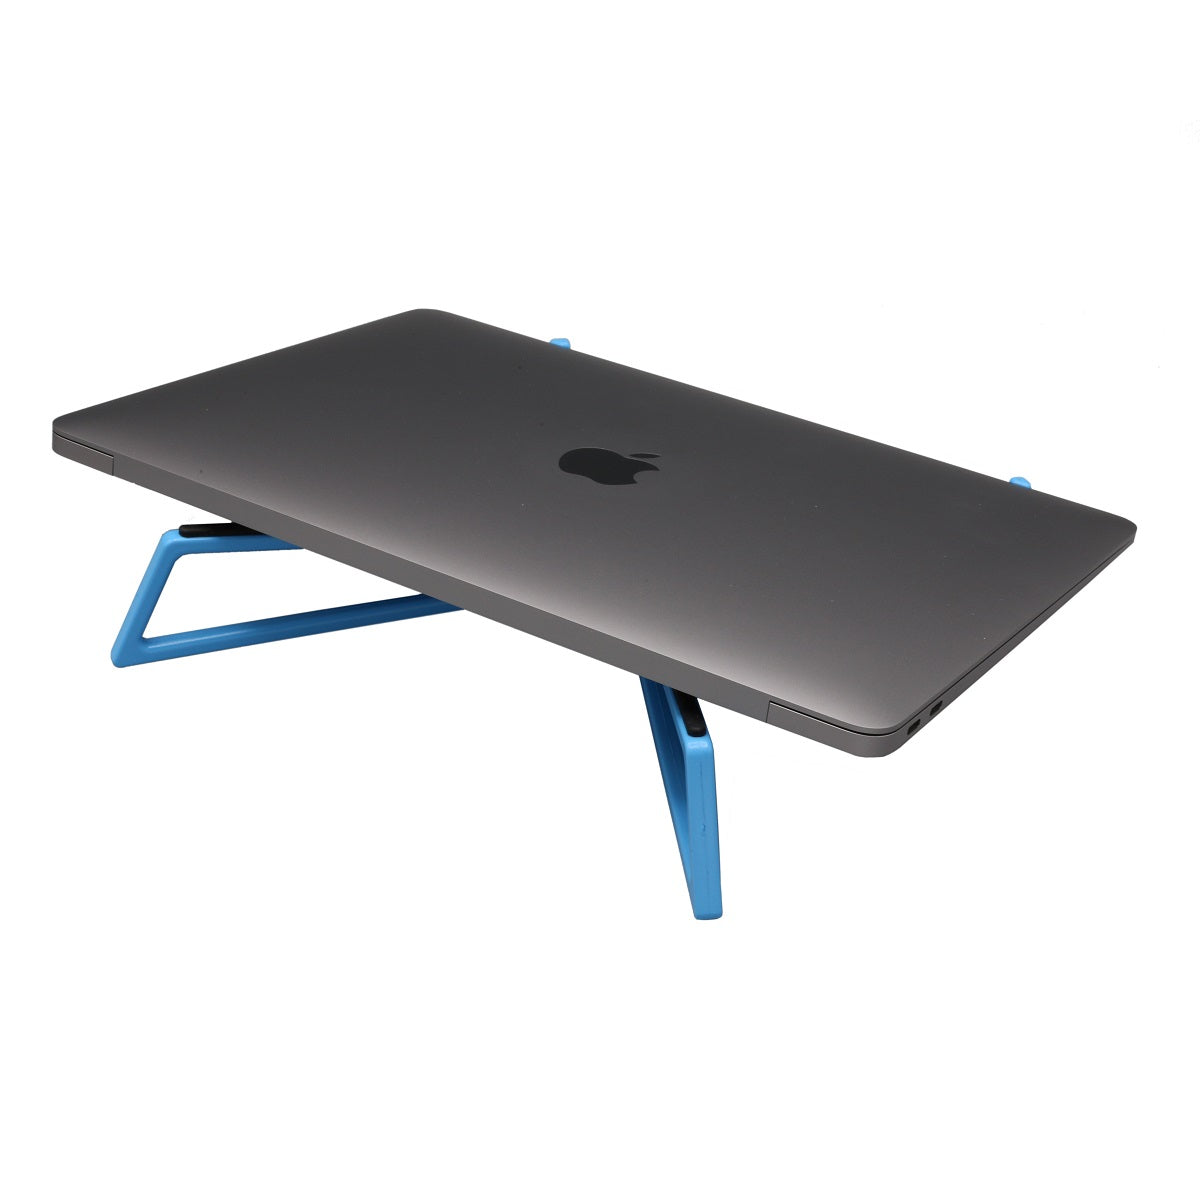 The FlexVerk Laptop Stand shown in blue holding a closed space gray macbook air on a white background.